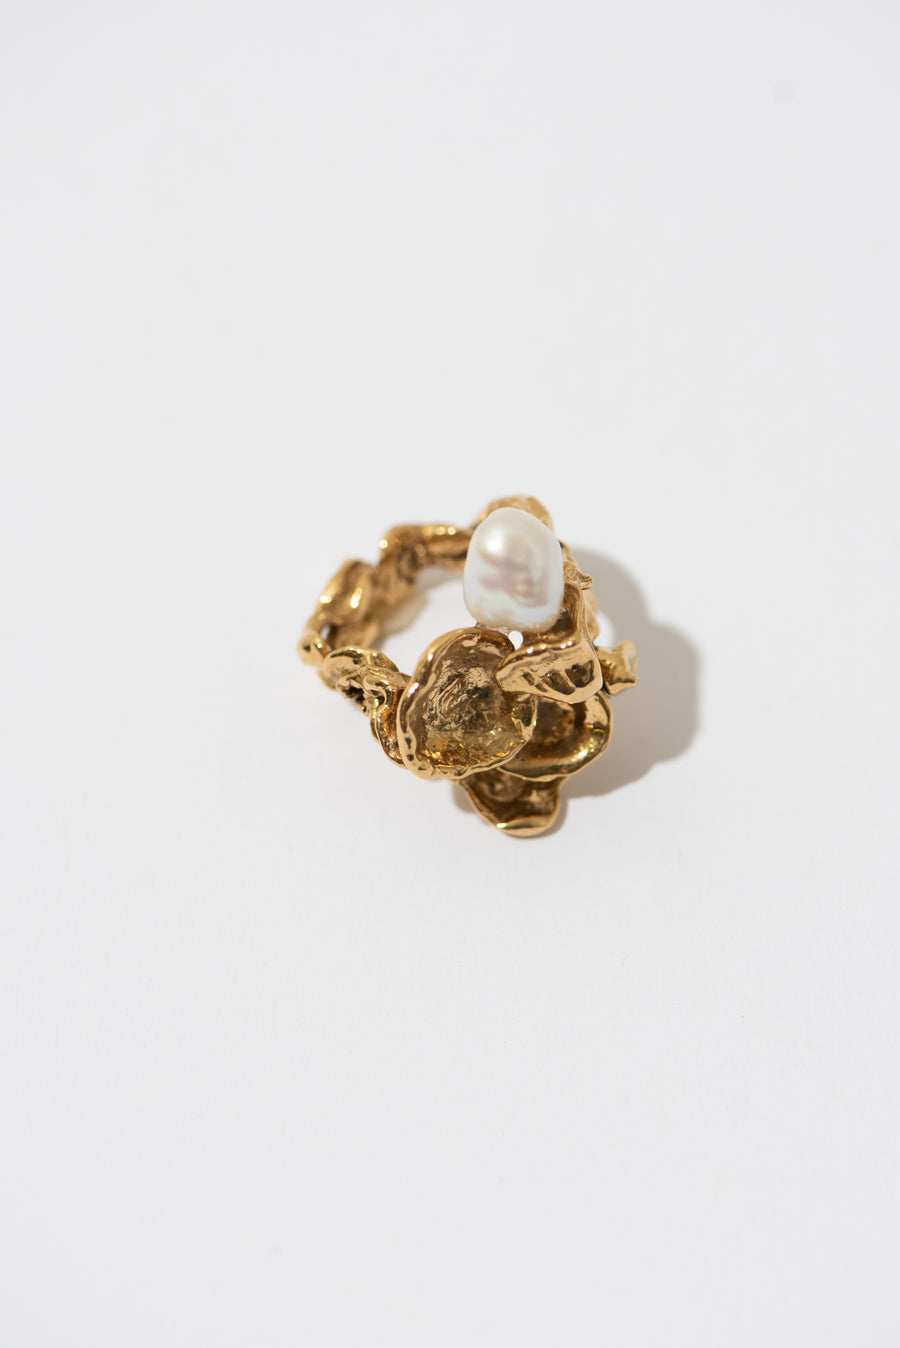 The Statement Pearl Ring - Big